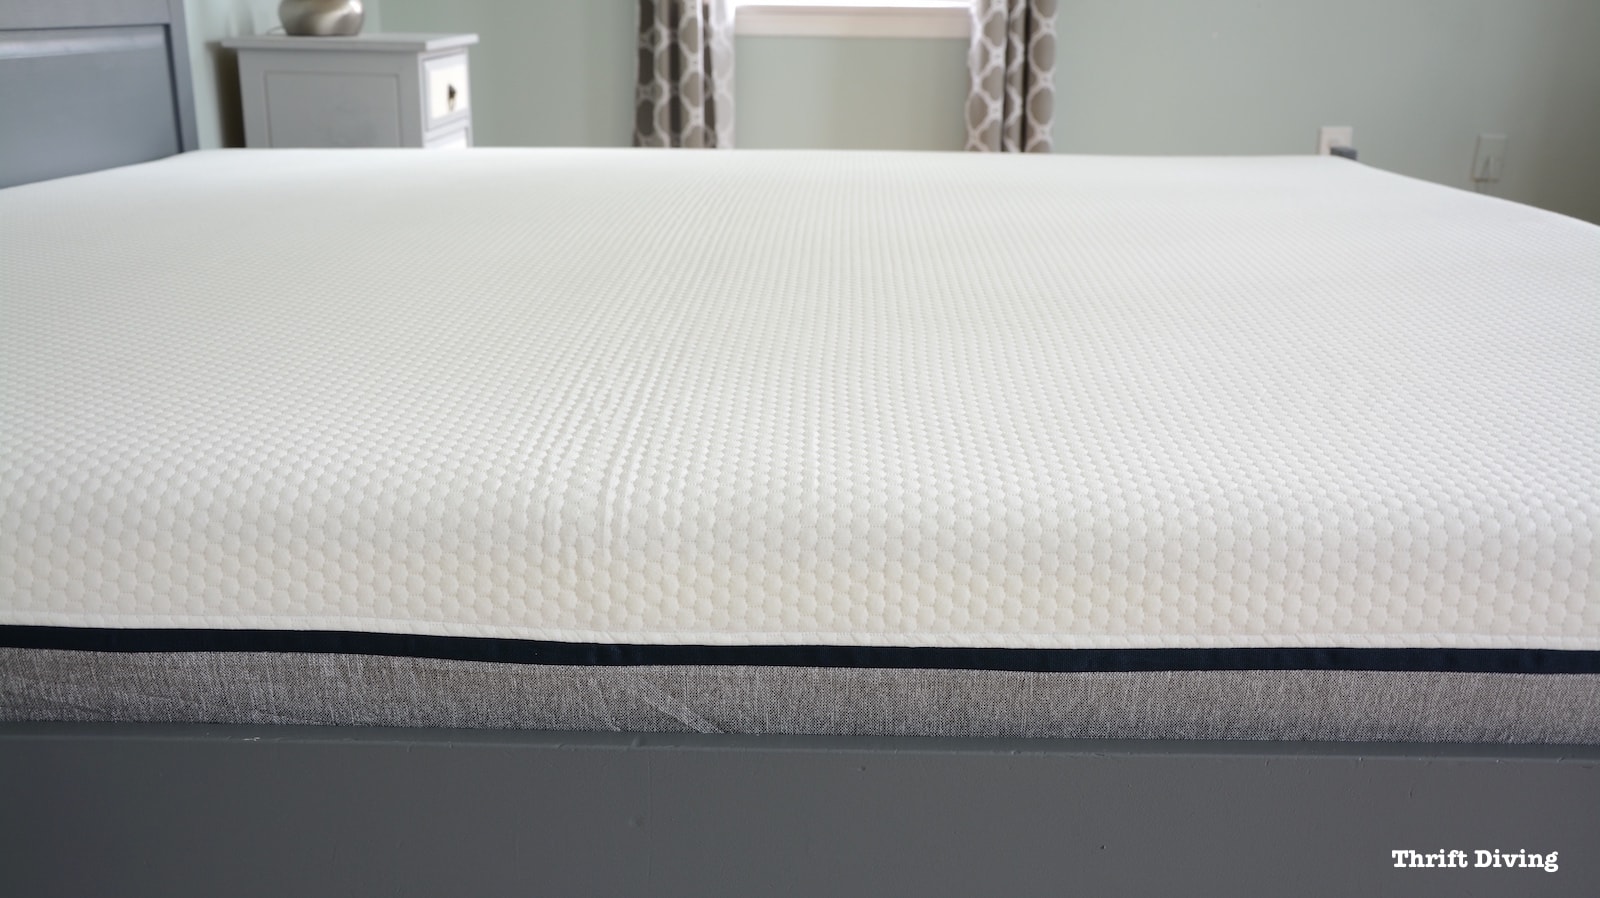 Lull Mattress Review and painted IKEA bed frame - AFTER - Quilted cover of the Lull mattress. - Thrift Diving